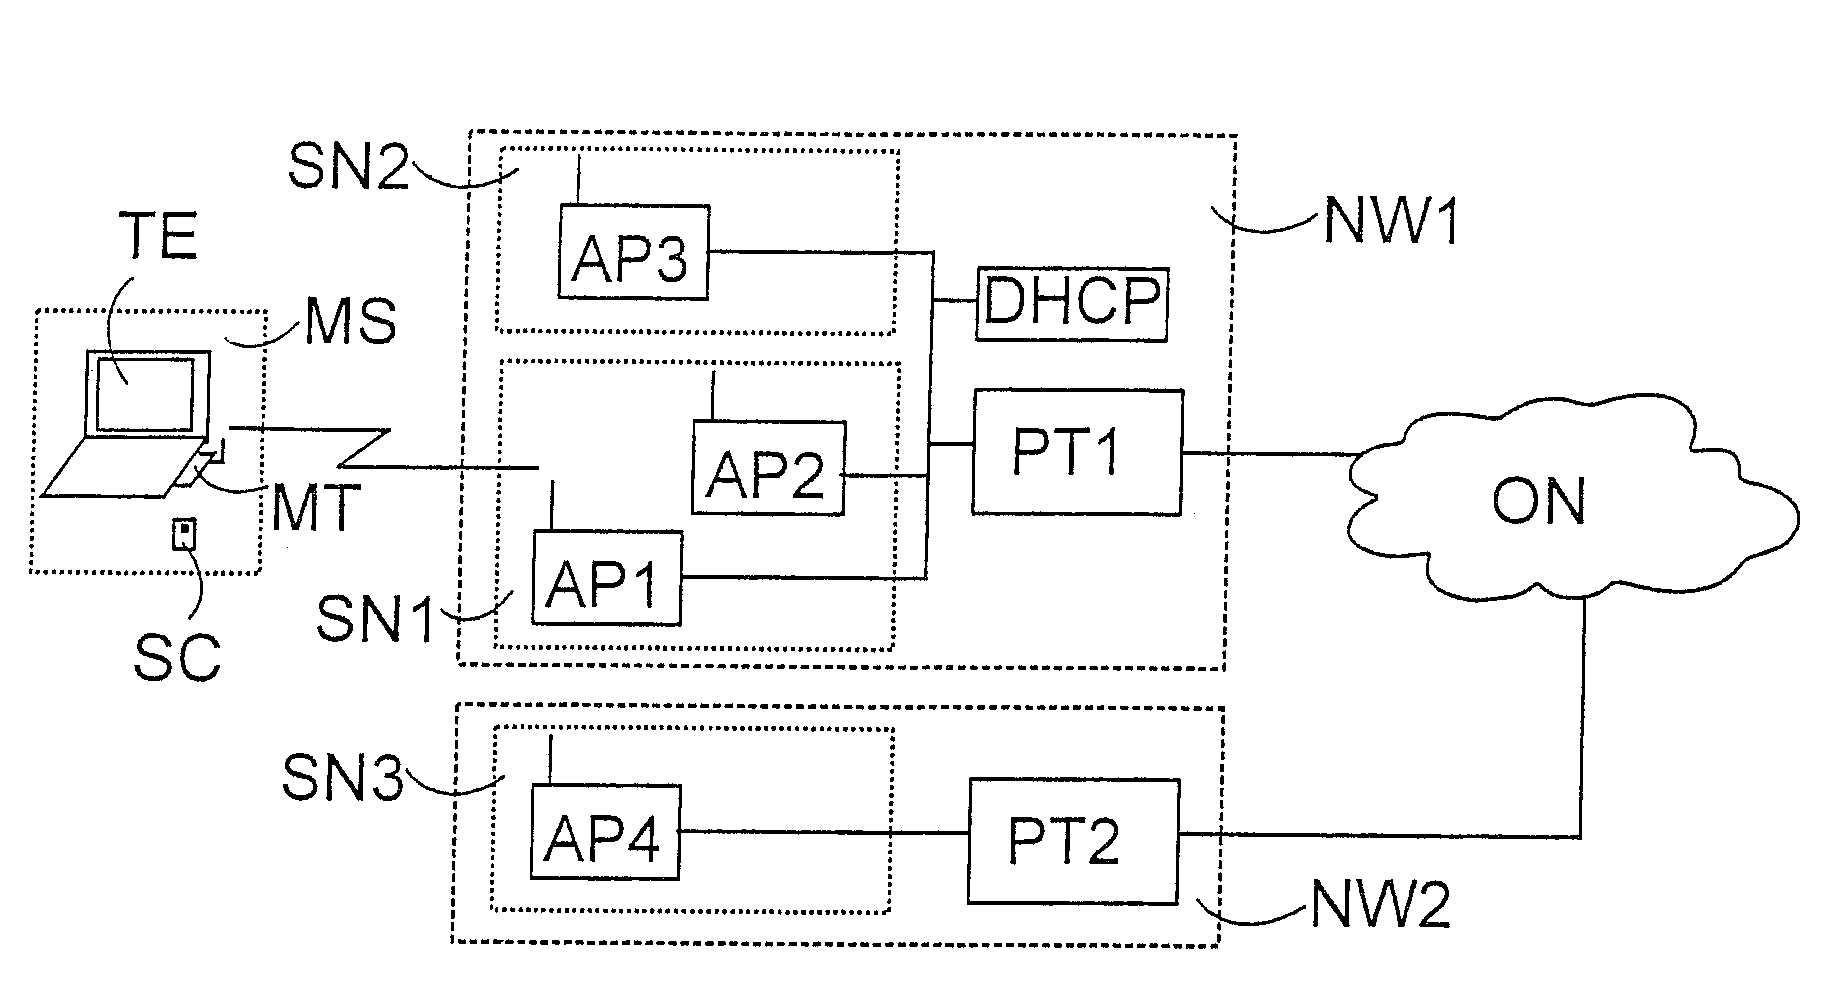 Method and equipment for accessing a telecommunication network